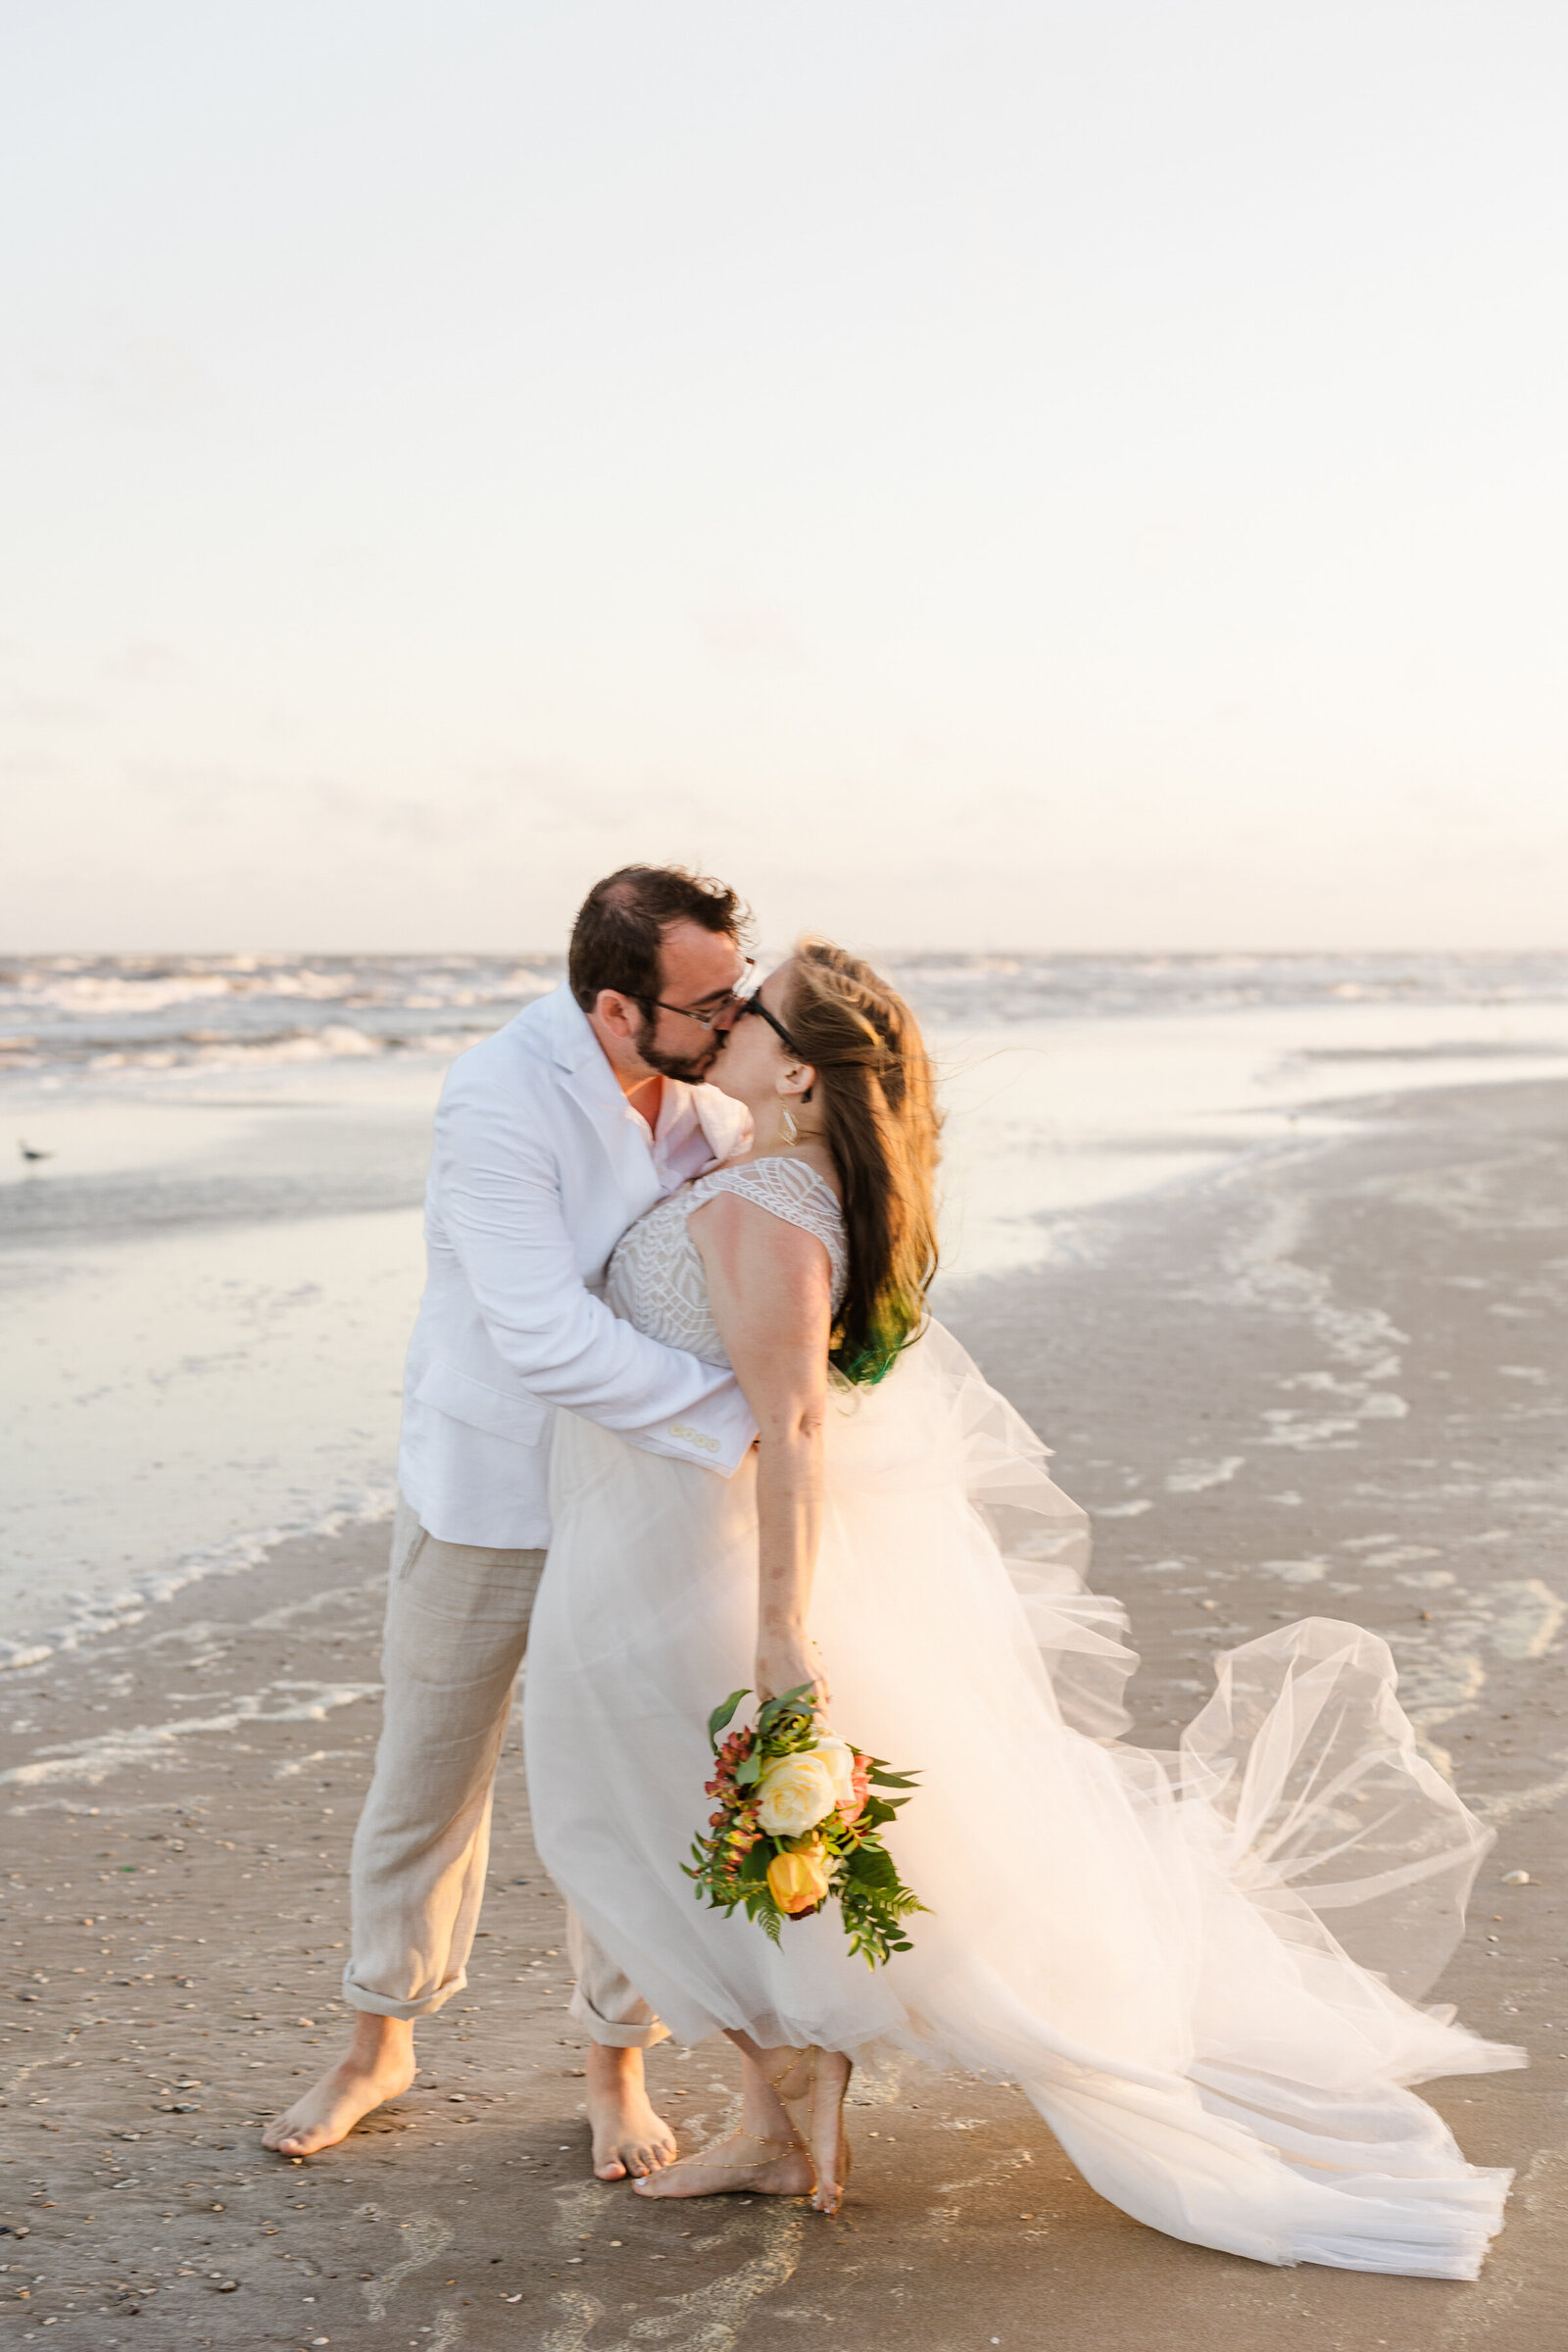 Newlywed couple sharing a kiss on the beach in Crystal Beach, Texas. They are both barefoot and wearing glasses. The bride is on the right and is wearing a flowing white dress and is holding a bouquet at her side. The groom is on the left and is wearing a white shirt and rolled up khaki pants.